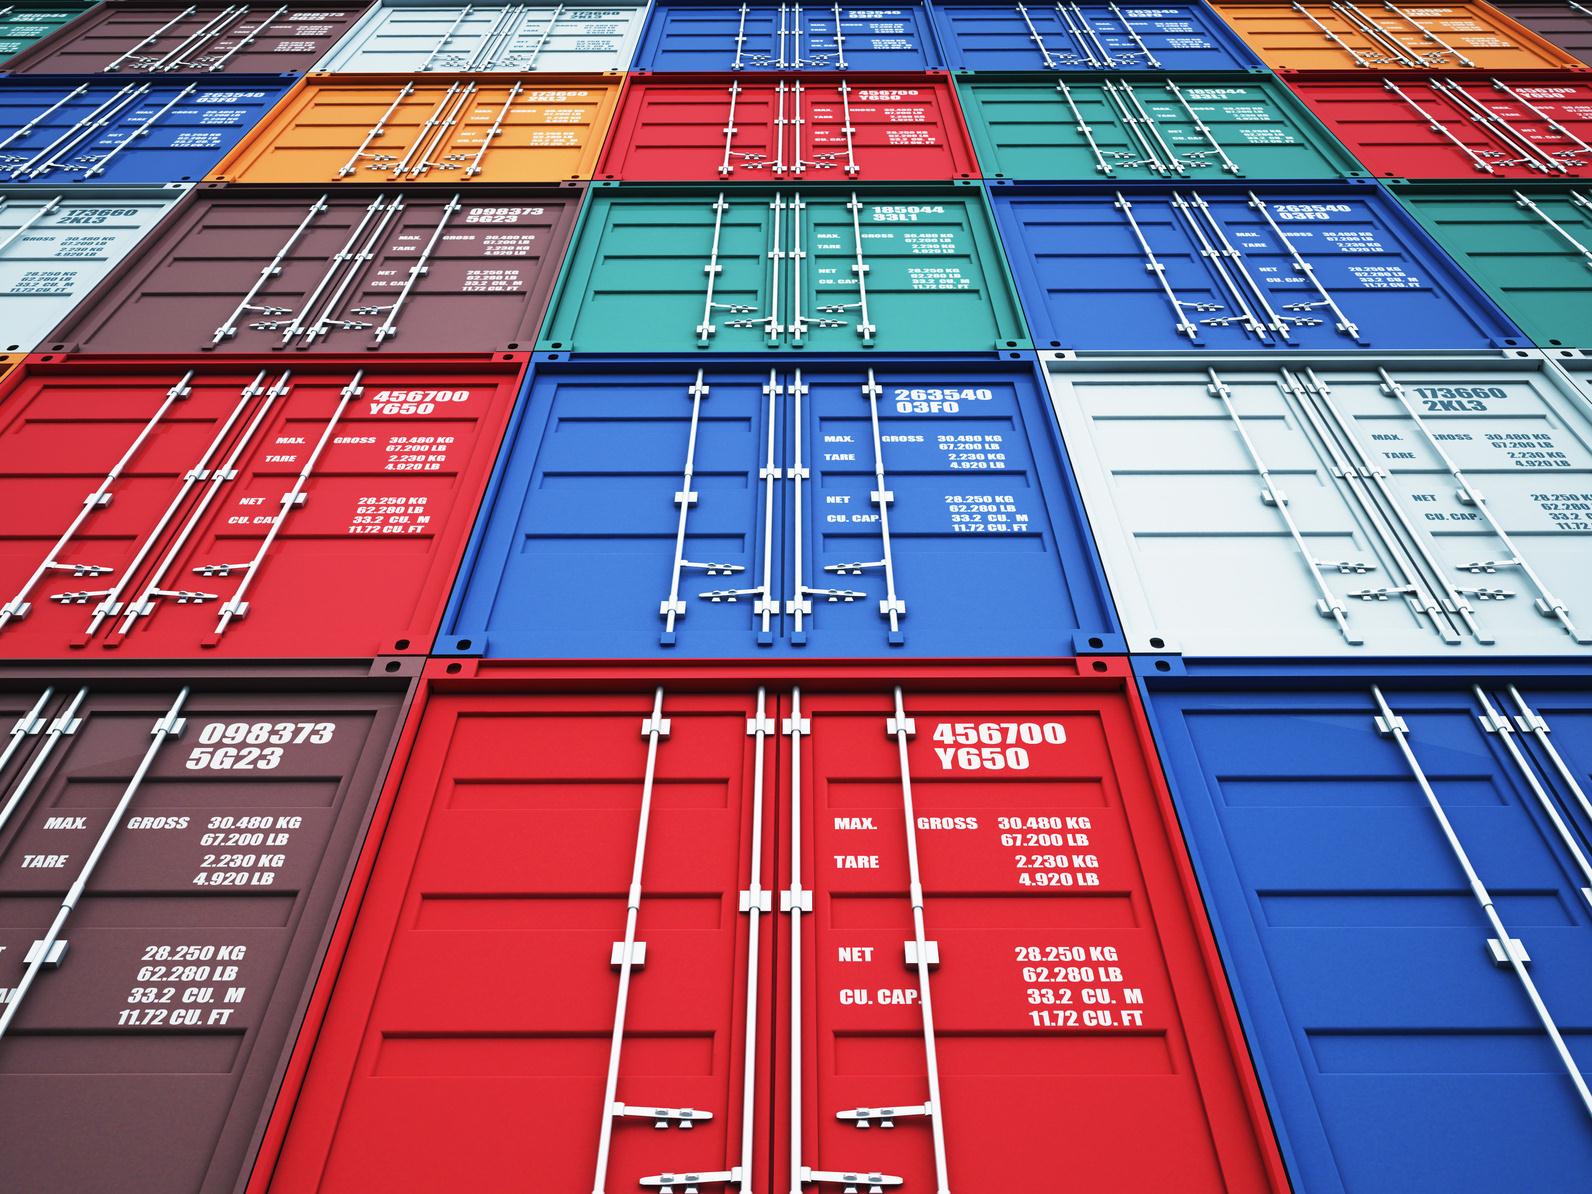 Self Photos / Files - Containers Fotolia_60501254_M